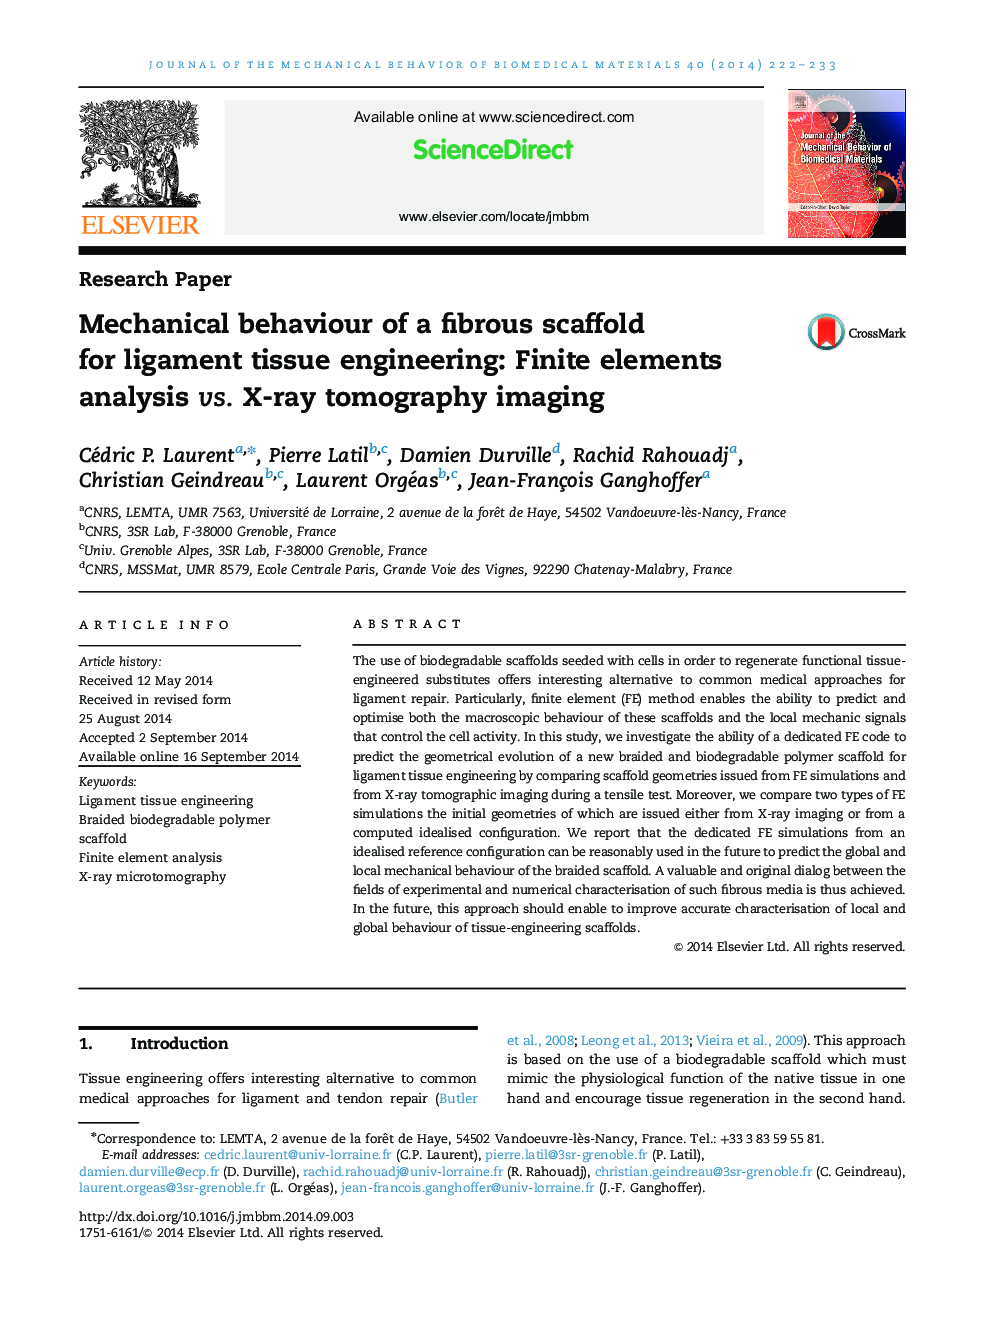 Mechanical behaviour of a fibrous scaffold for ligament tissue engineering: Finite elements analysis vs. X-ray tomography imaging